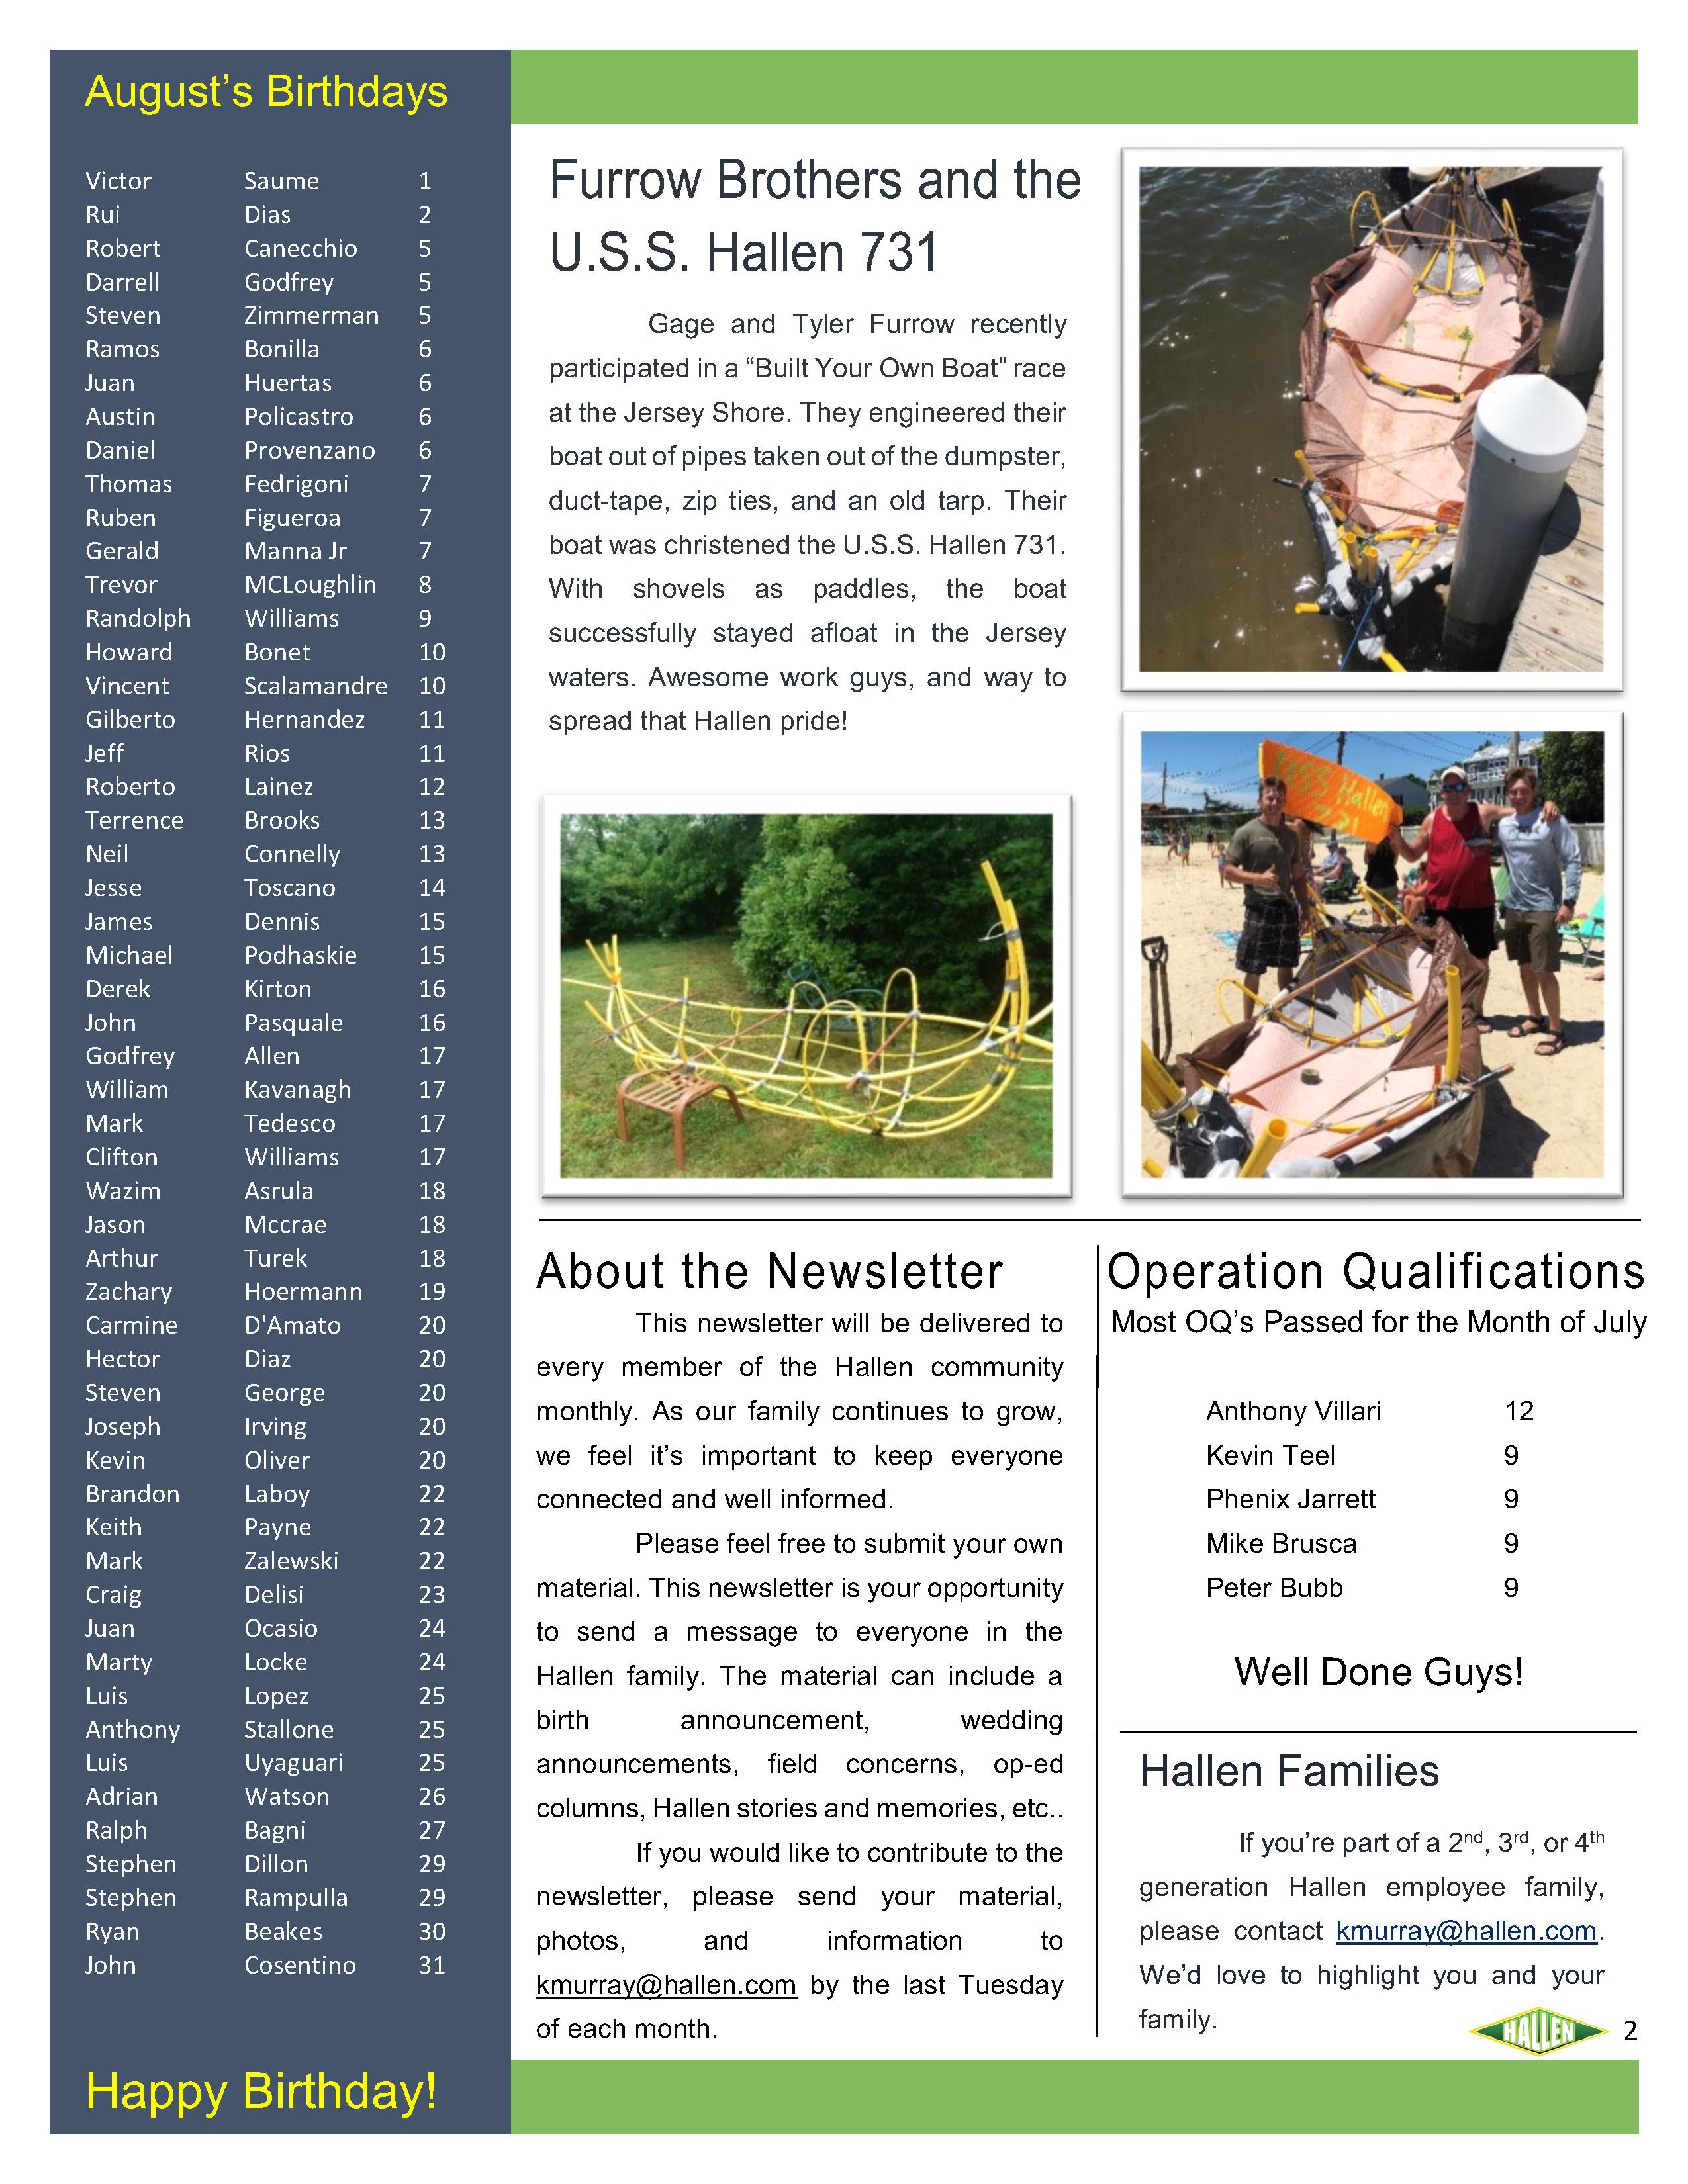 August 2018 Company Newsletter page 2